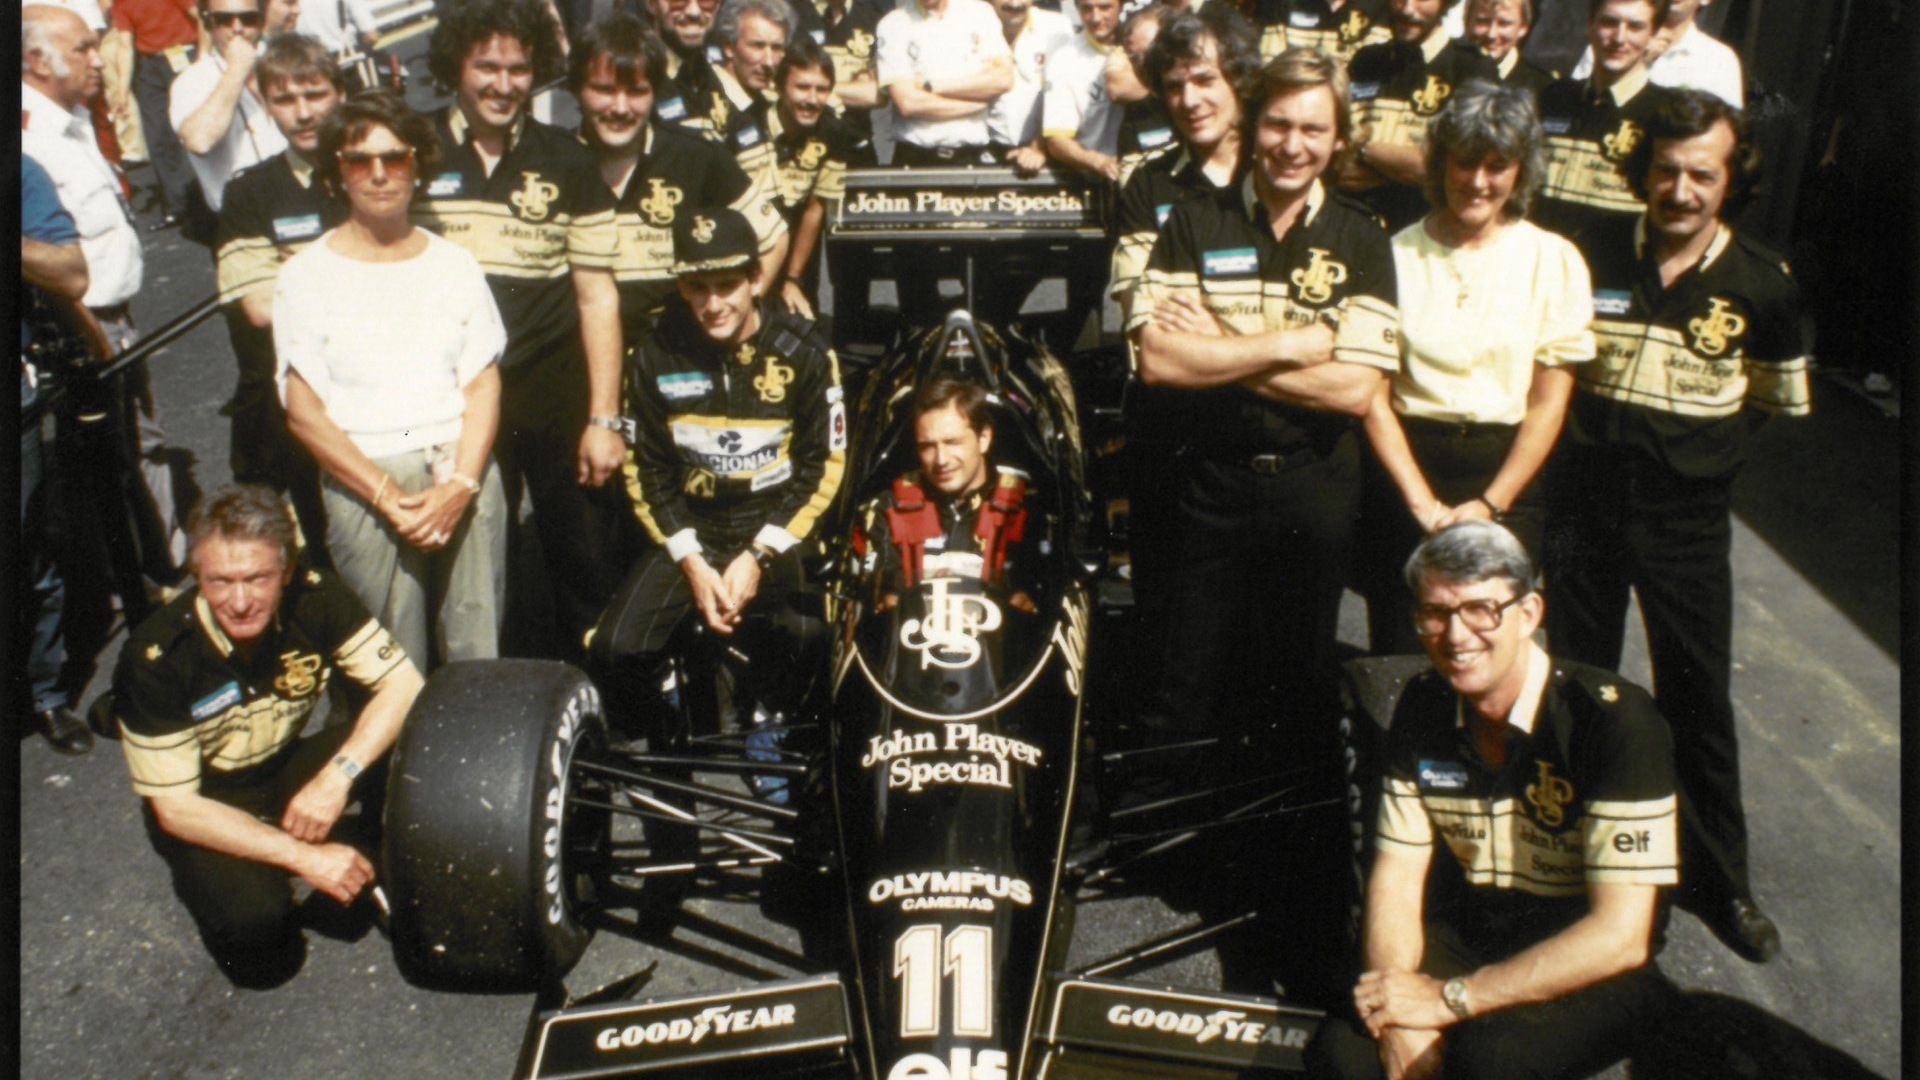 Hazel Chapman with Team Lotus in 1985 (photo by The Colin Chapman Foundation)